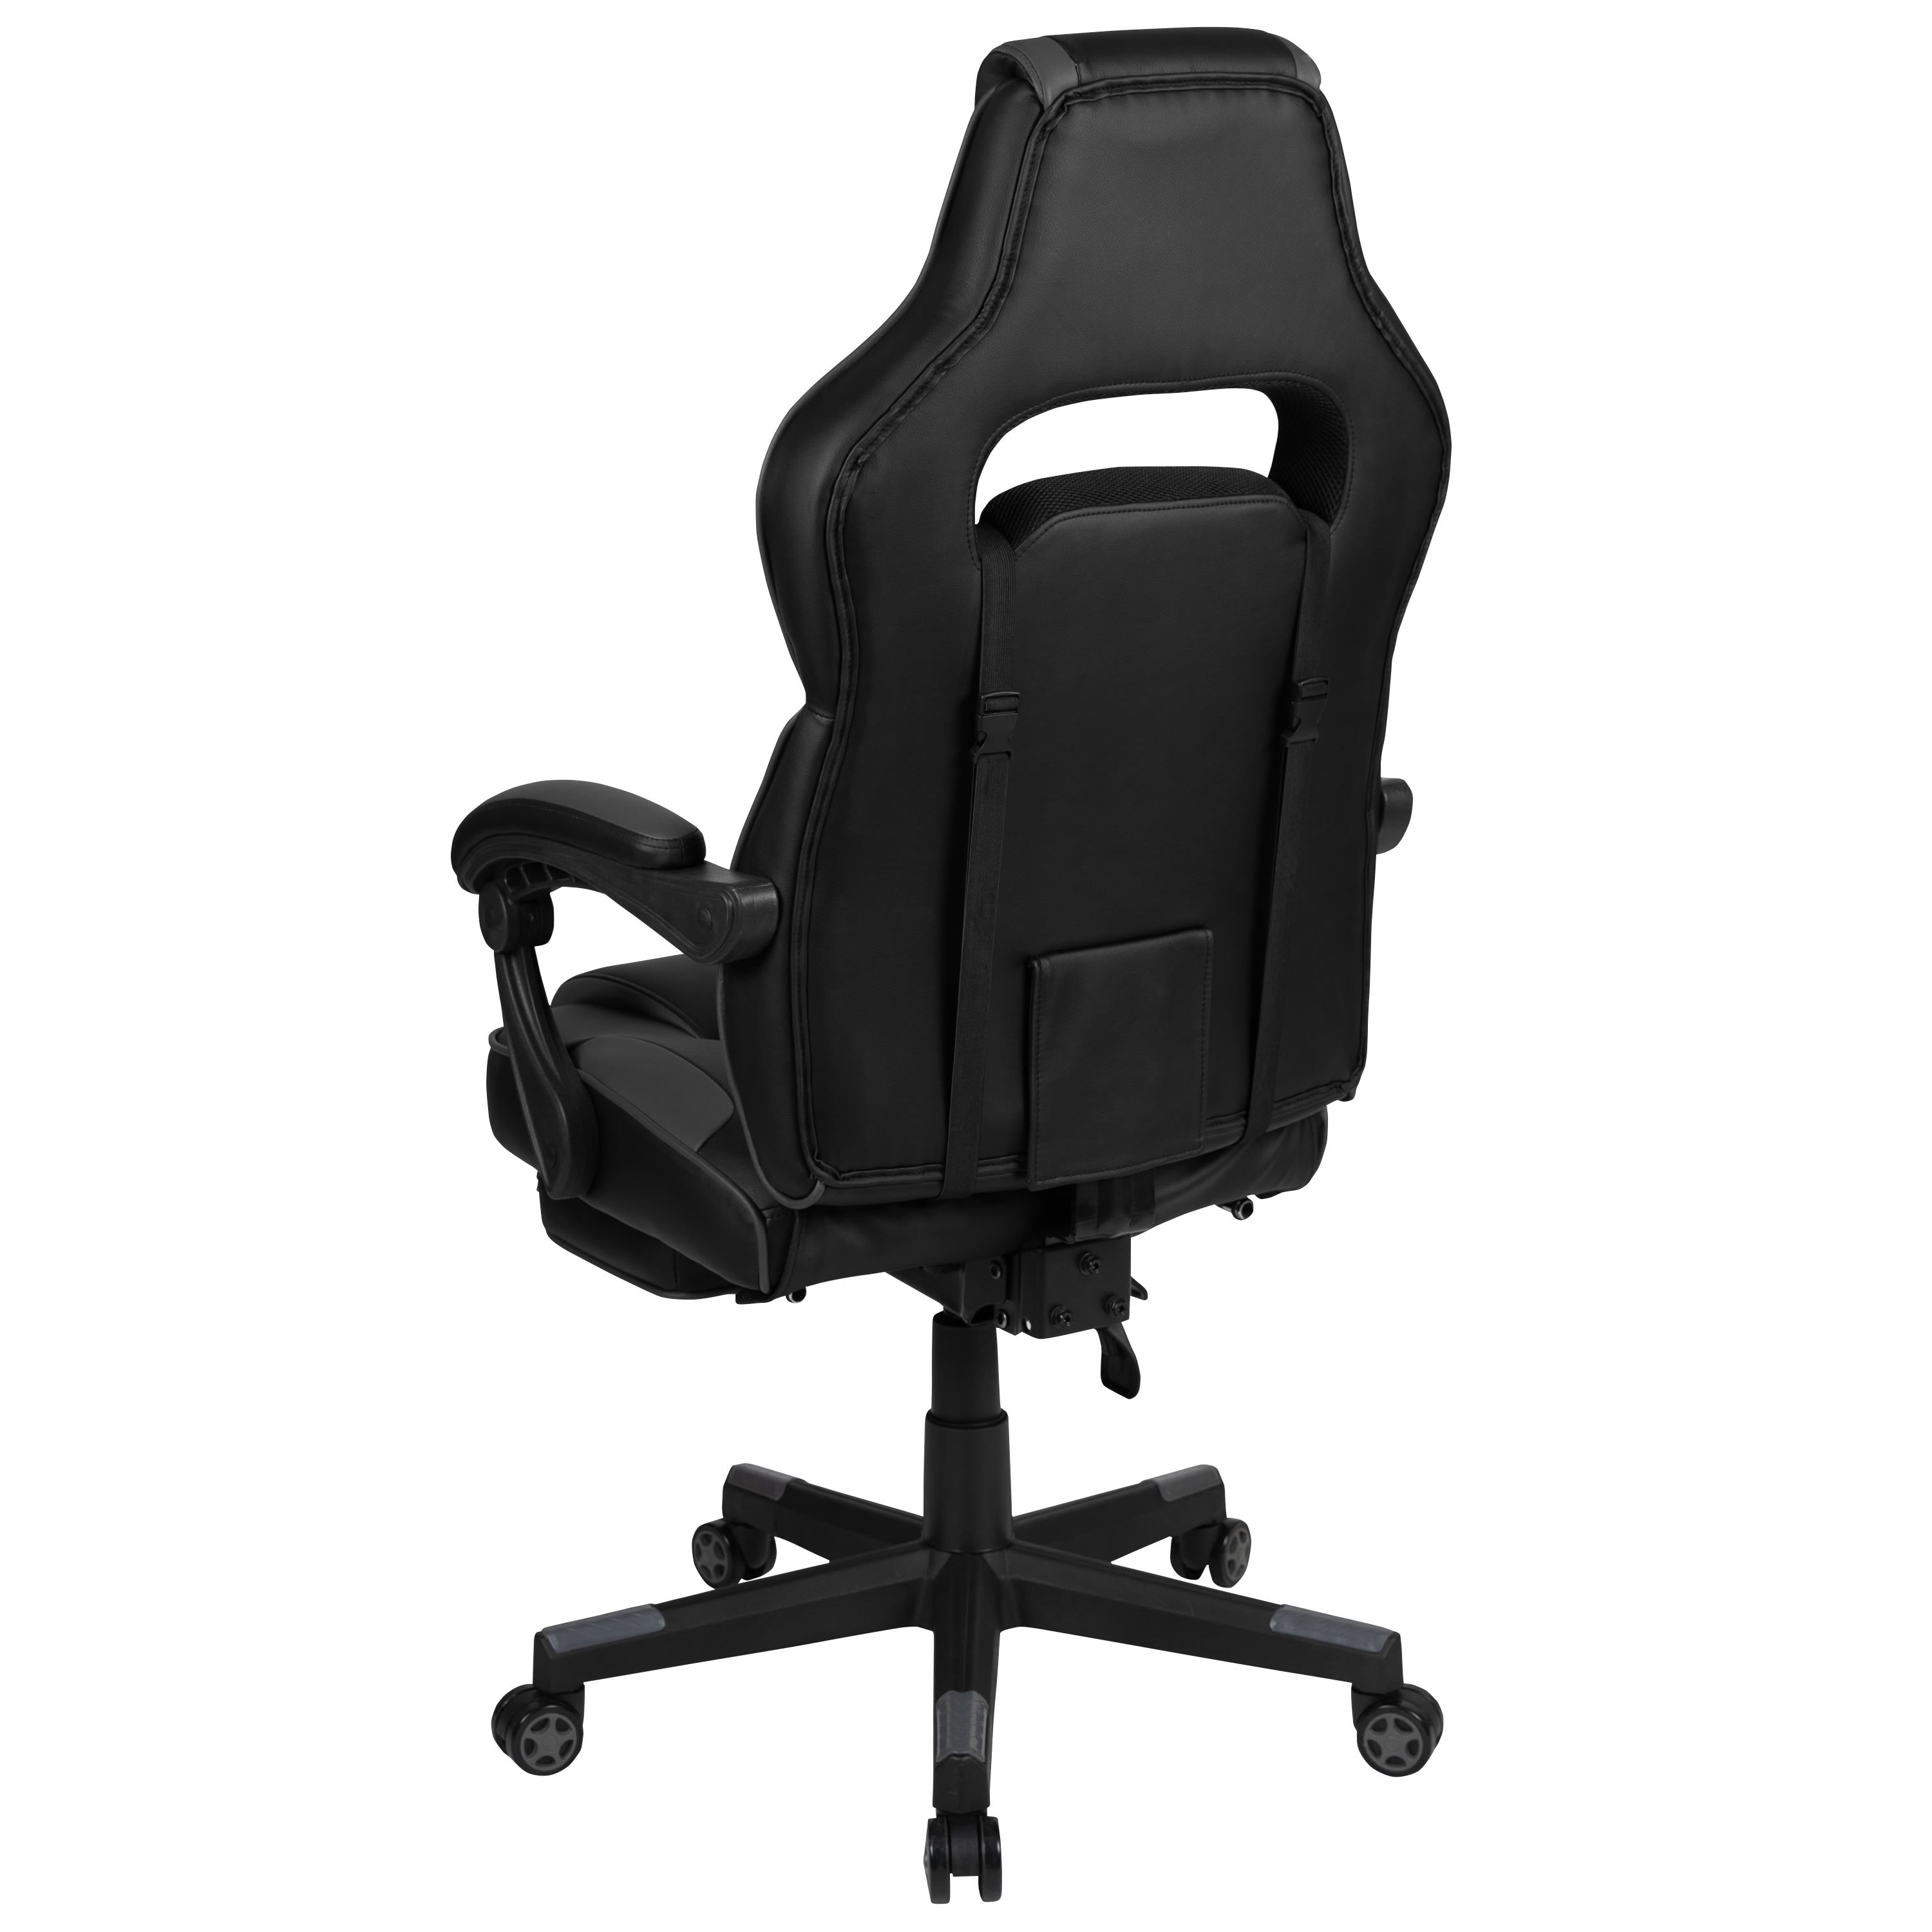 BlackArc Arc Tetra 4.0 Gaming Chair Outfitted With Footrest, Headrest,  Lumbar Support Massage Pillow, Reclining Seat/Arms